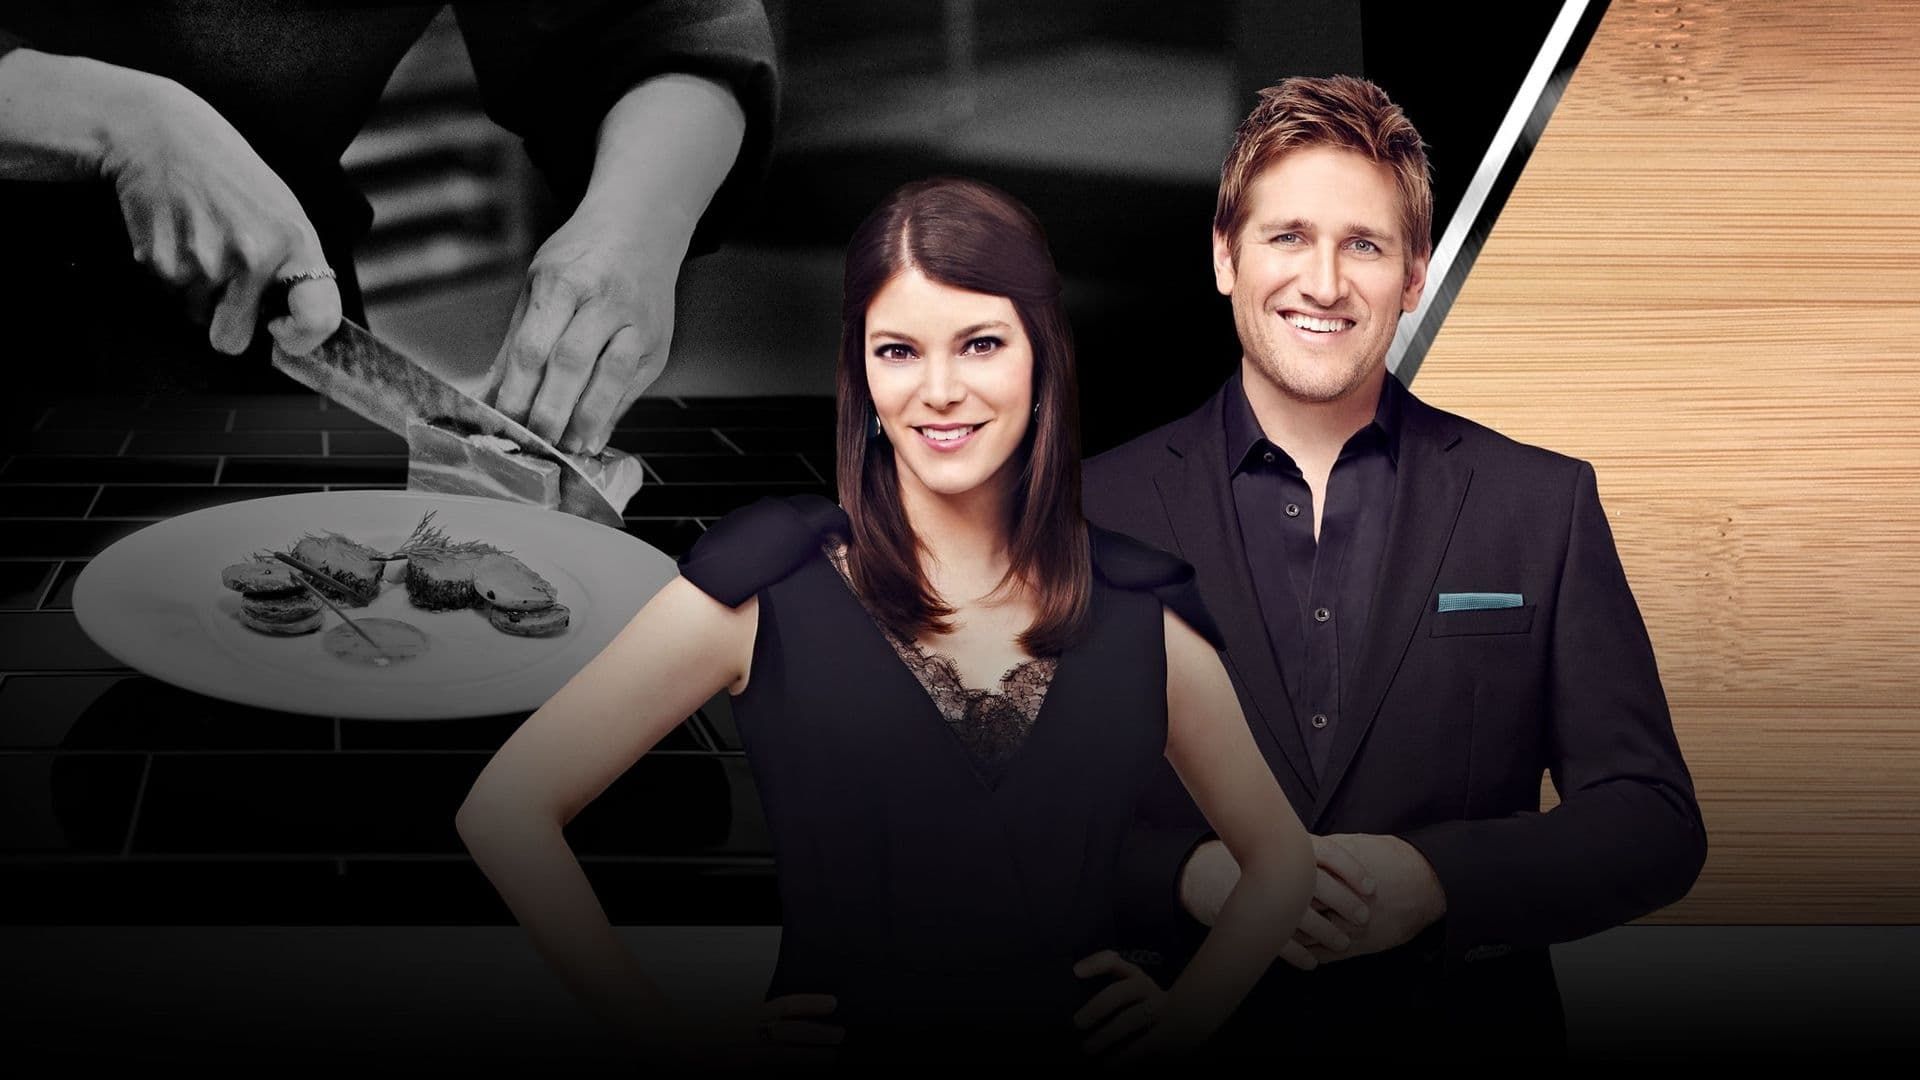 Top Chef Duels background